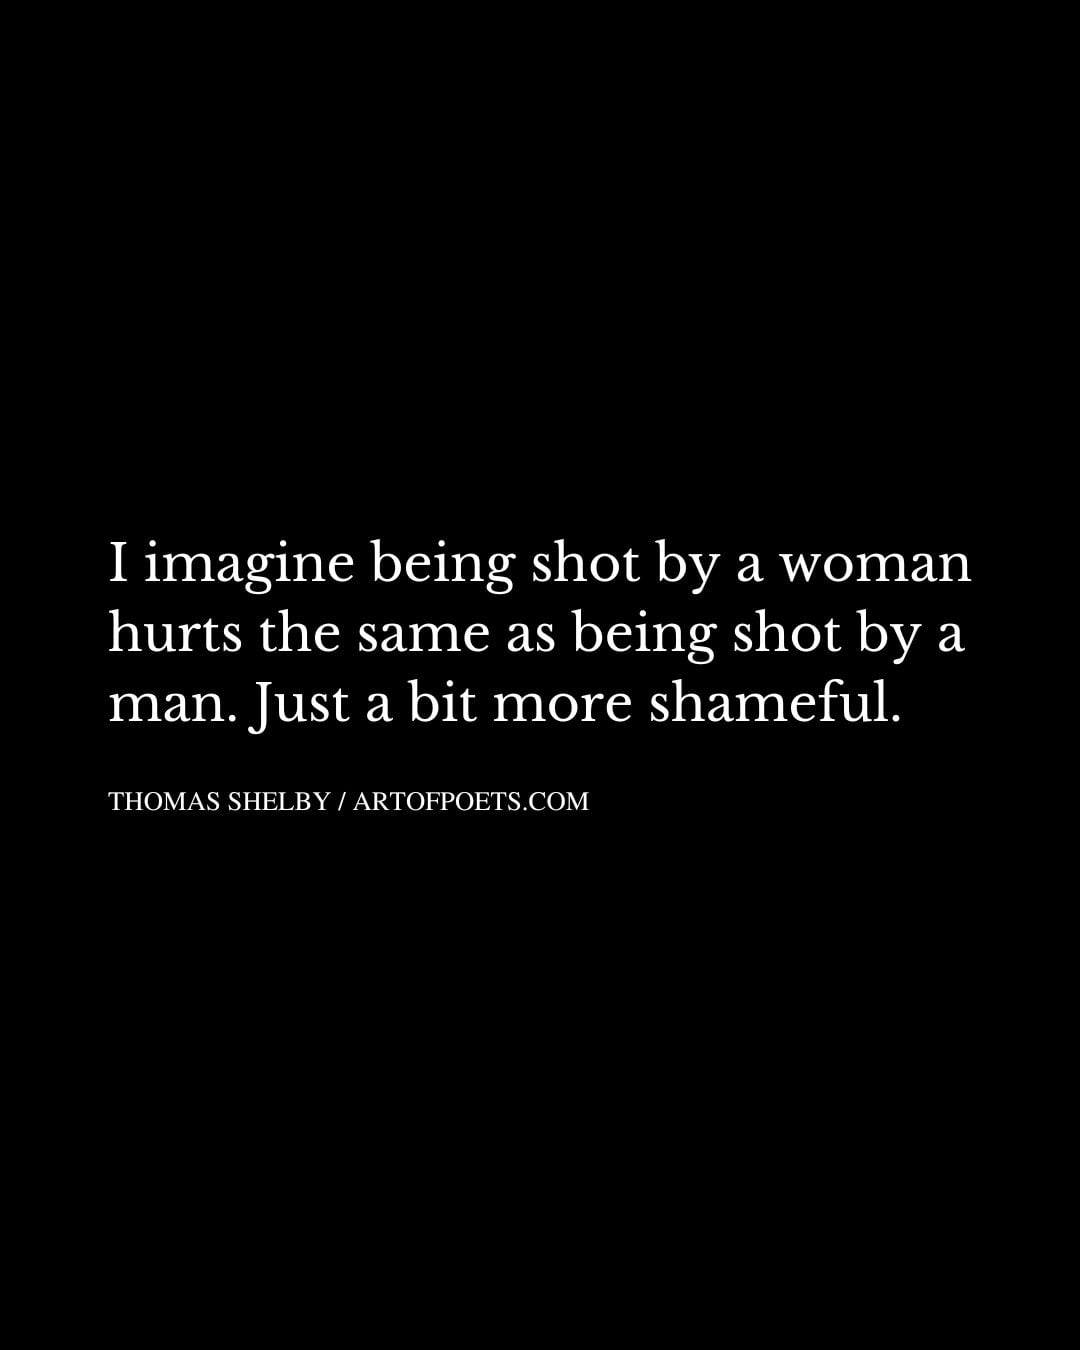 I imagine being shot by a woman hurts the same as being shot by a man. Just a bit more shameful